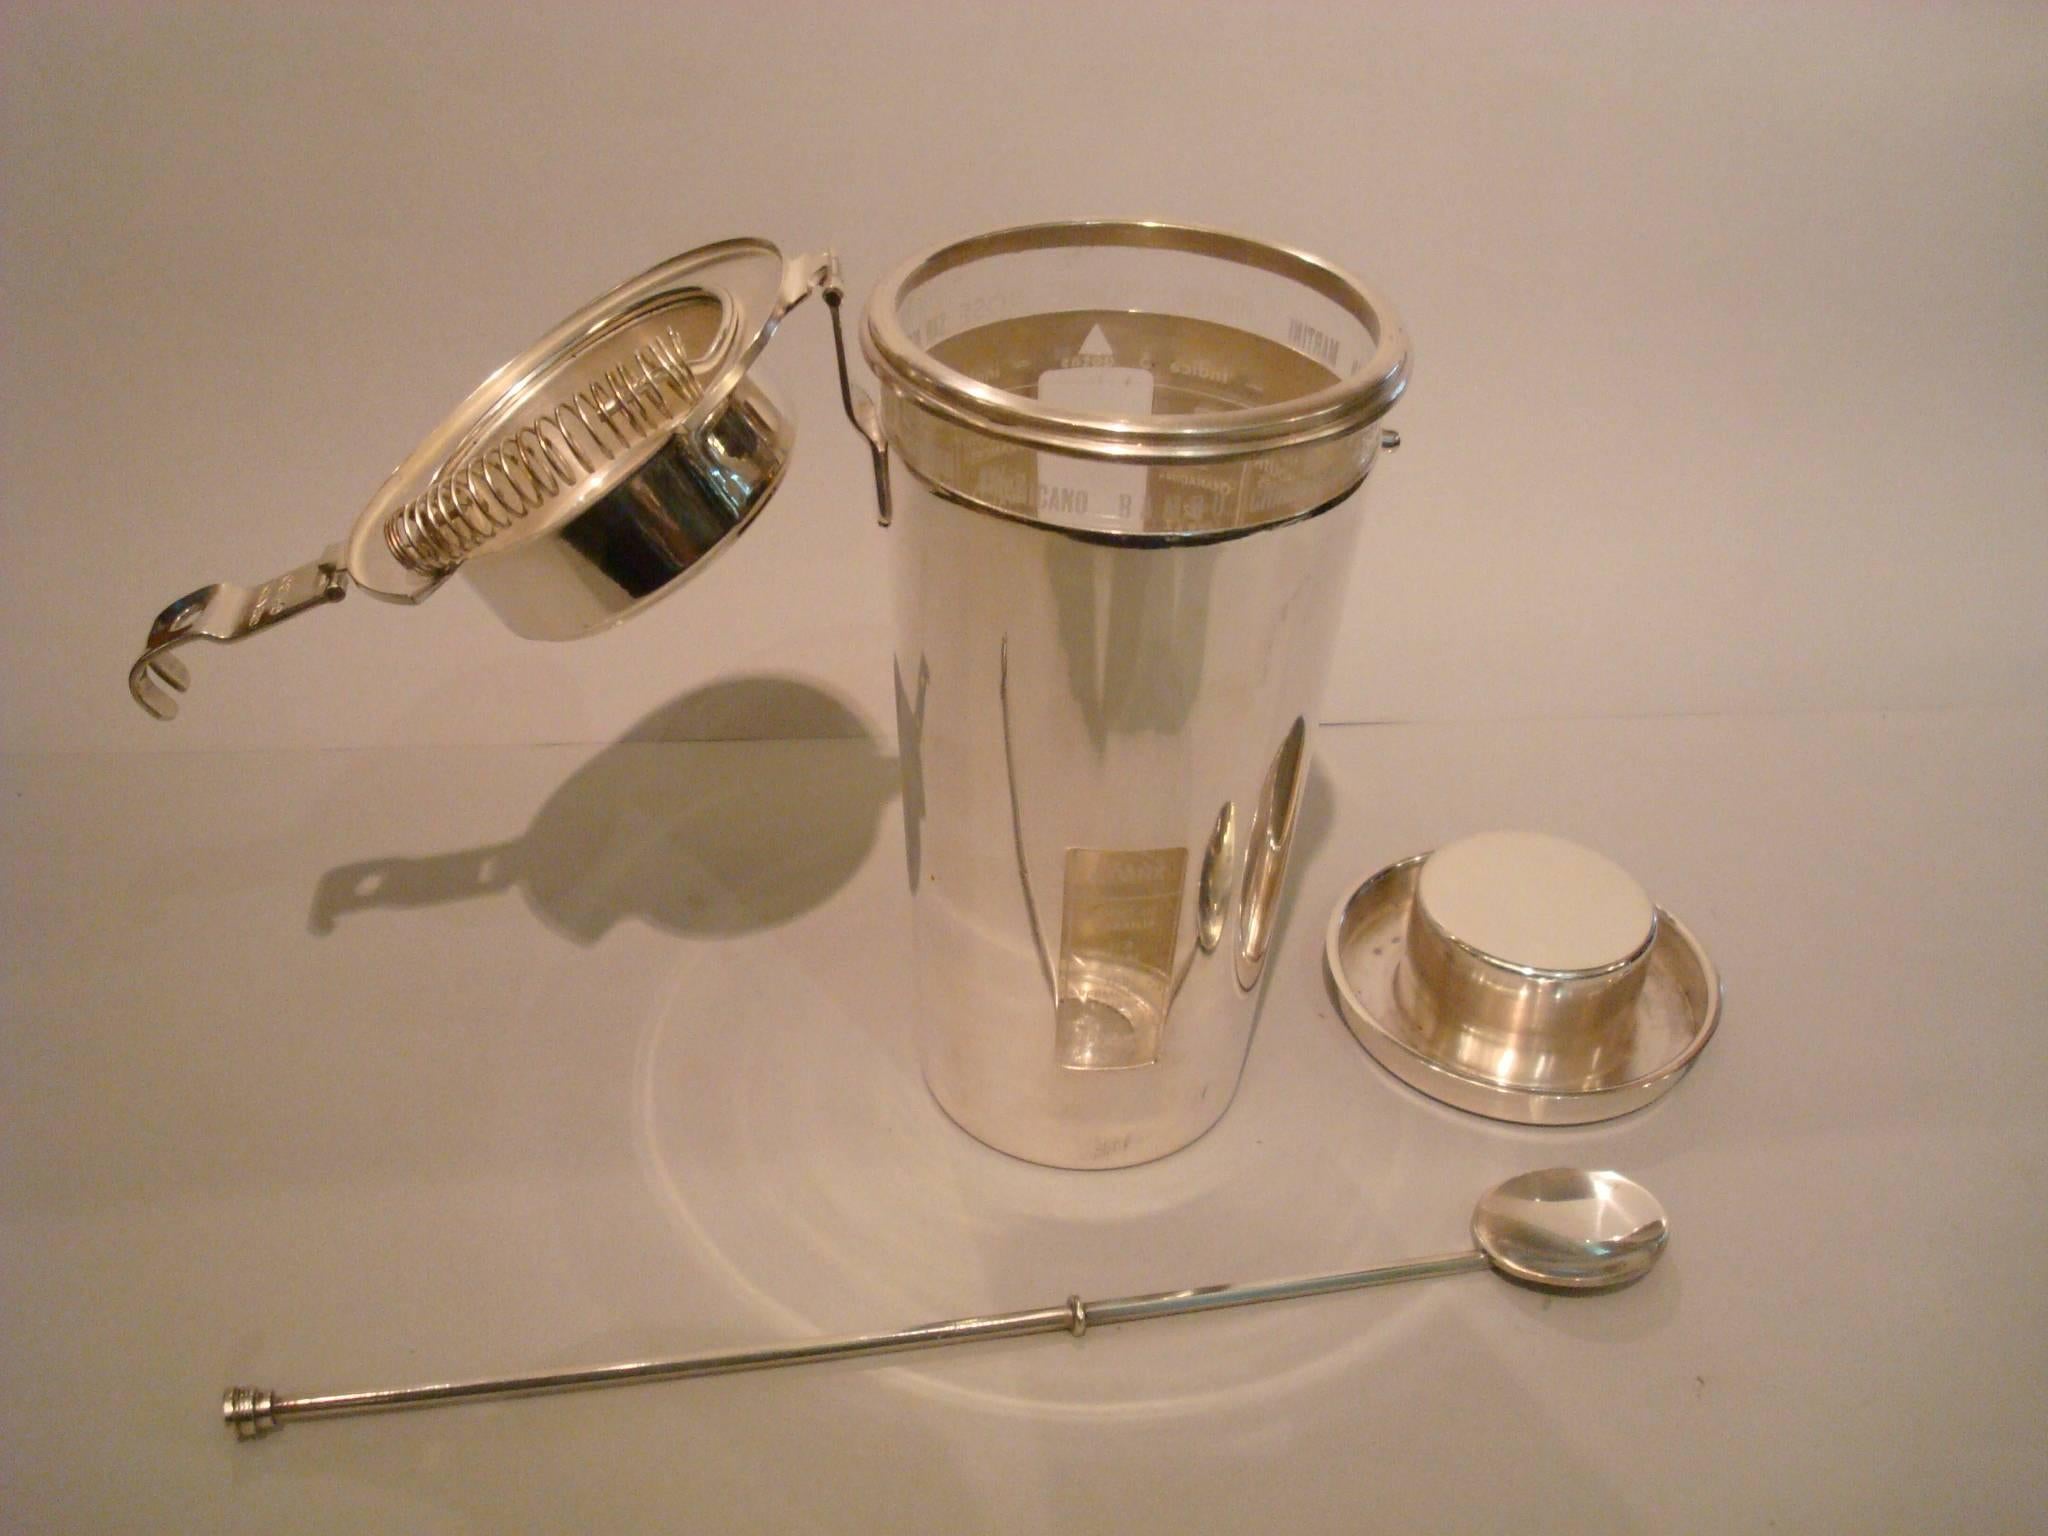 20th Century Art Deco Recipes Cocktail Shaker “the Barman“ by Ghiso, France 1930’s